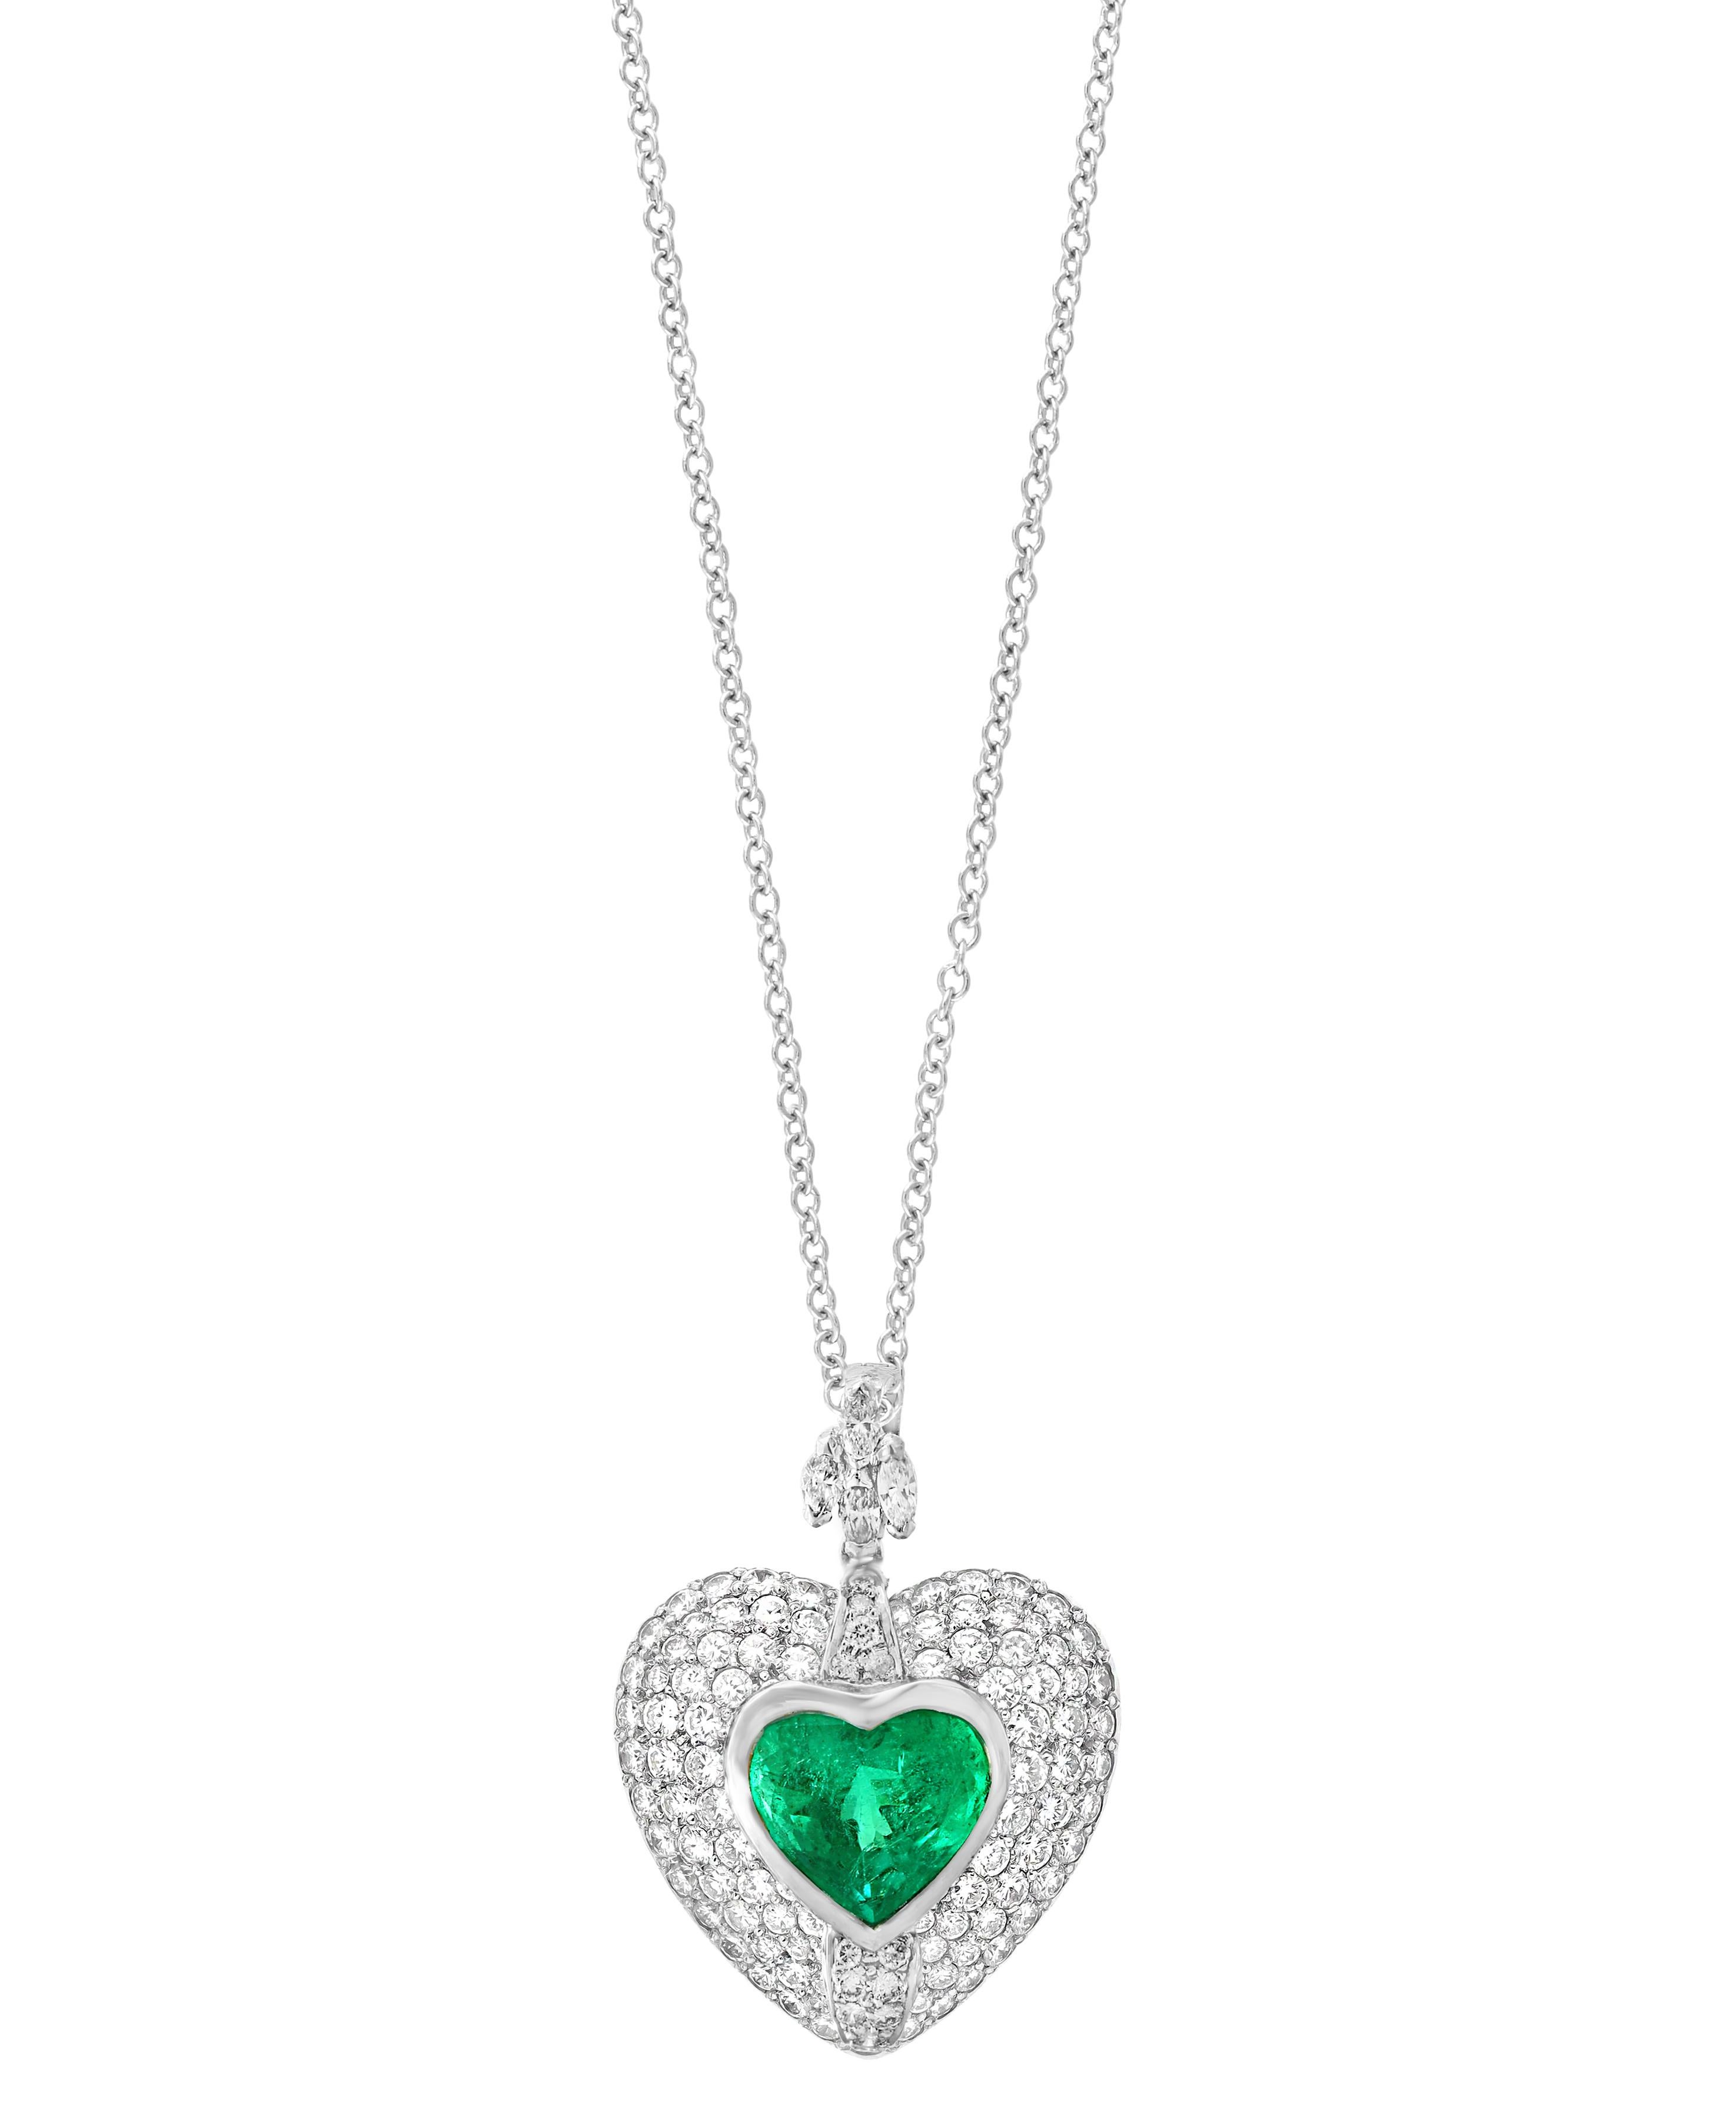 Approximately 5 Carat Heart shape Colombian Emerald and Diamond Pendant Necklace Enhancer
This spectacular Pendant Necklace consisting of a single Heart shape emeralds approximately 5 Carat. The perfect Heart Shape Emerald is surrounded by